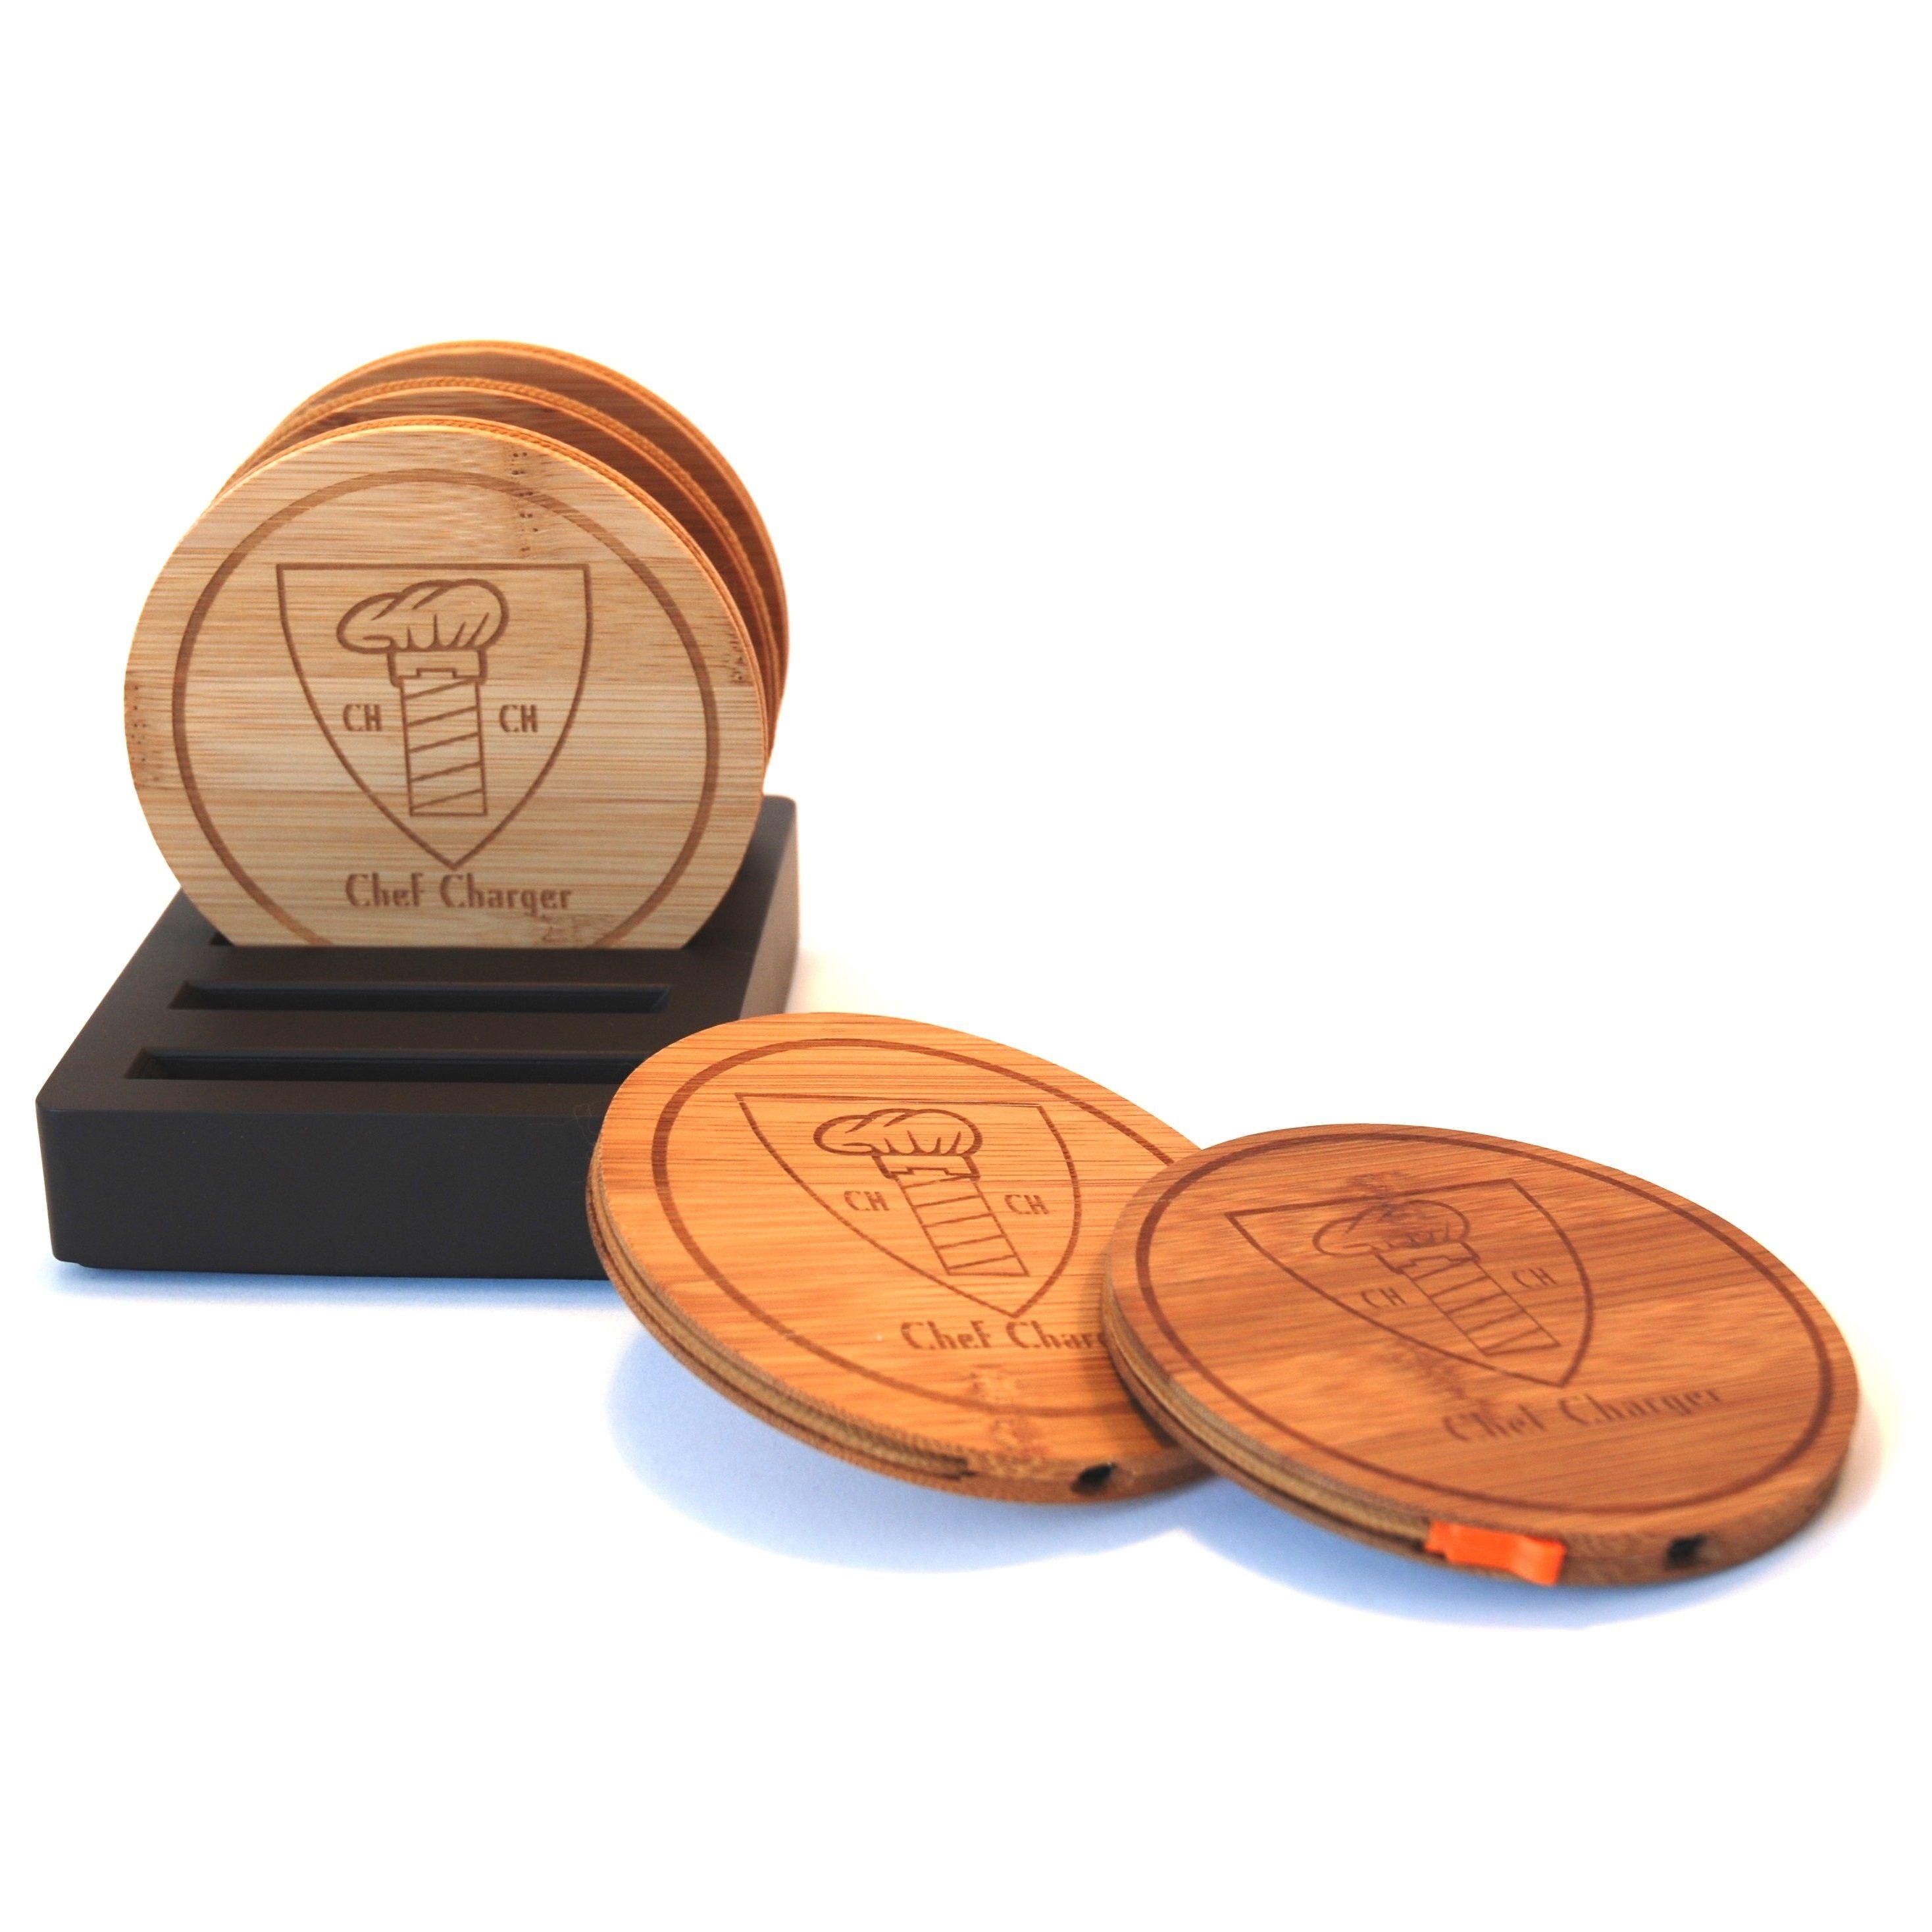 Bamboo Money Logo - Bamboo Drink Coaster, set of with logo, SPECIAL OFFER